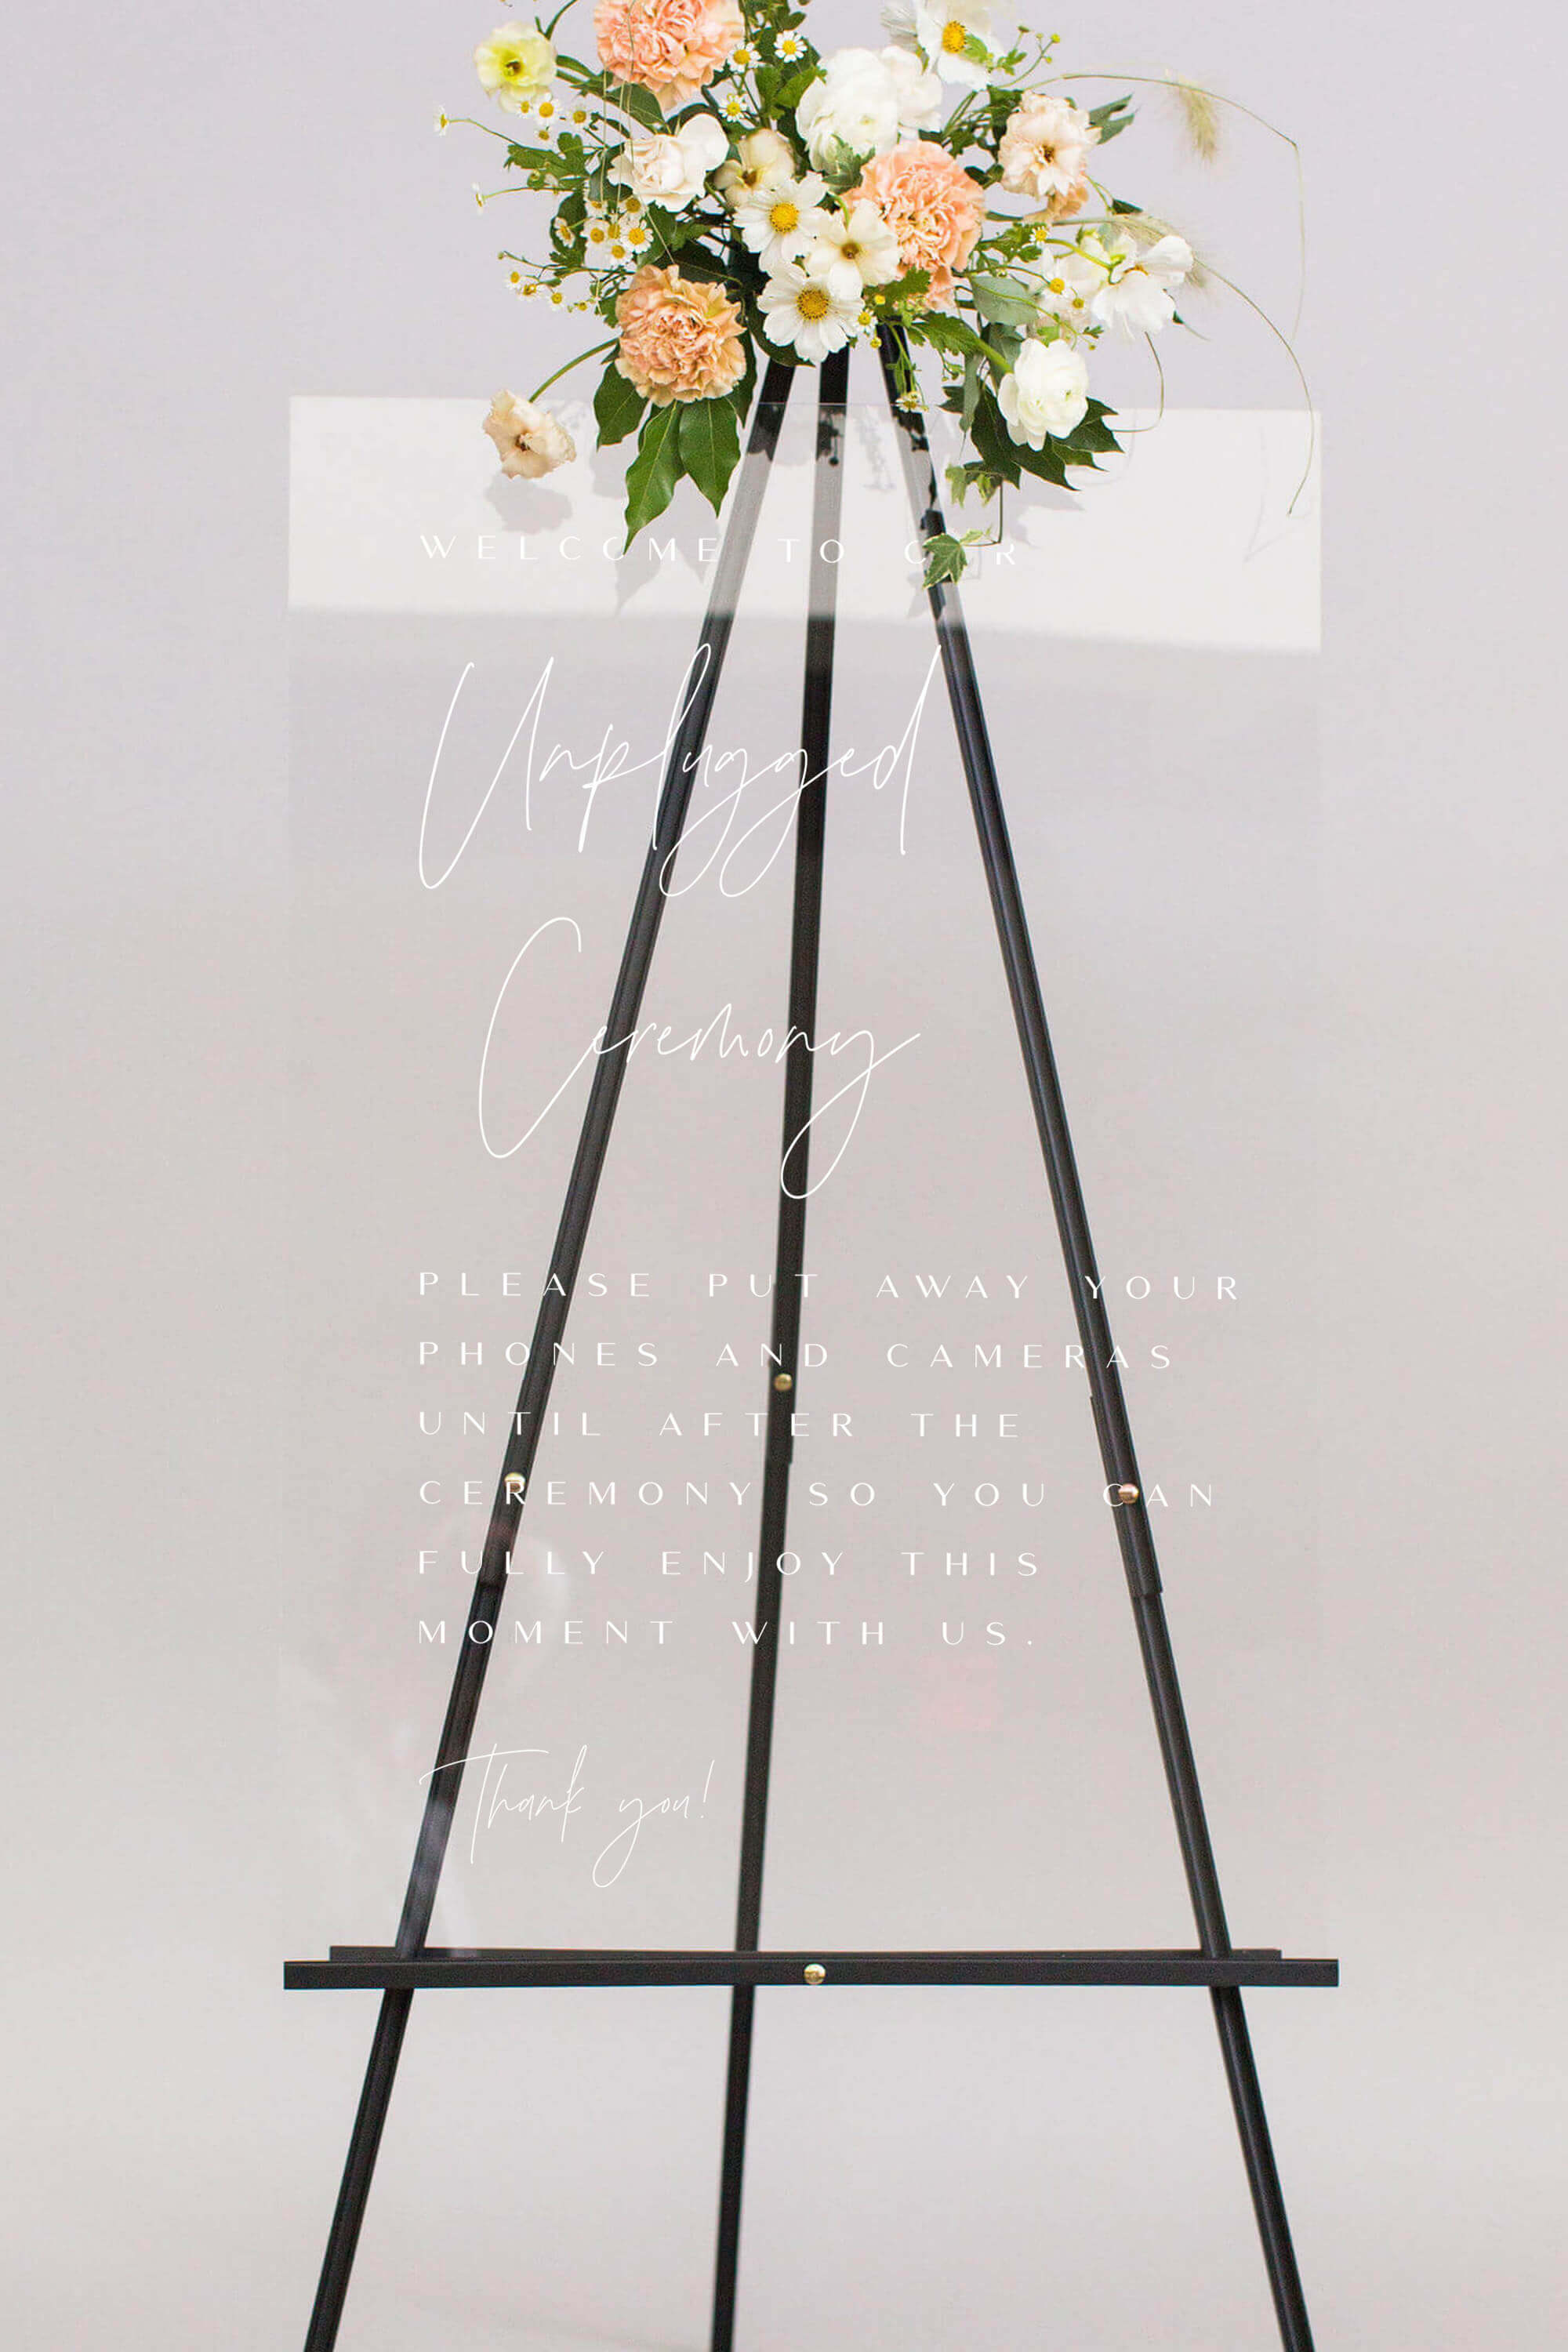 Clear Unplugged Ceremony Sign Ideas Acrylic Lily Roe Co.